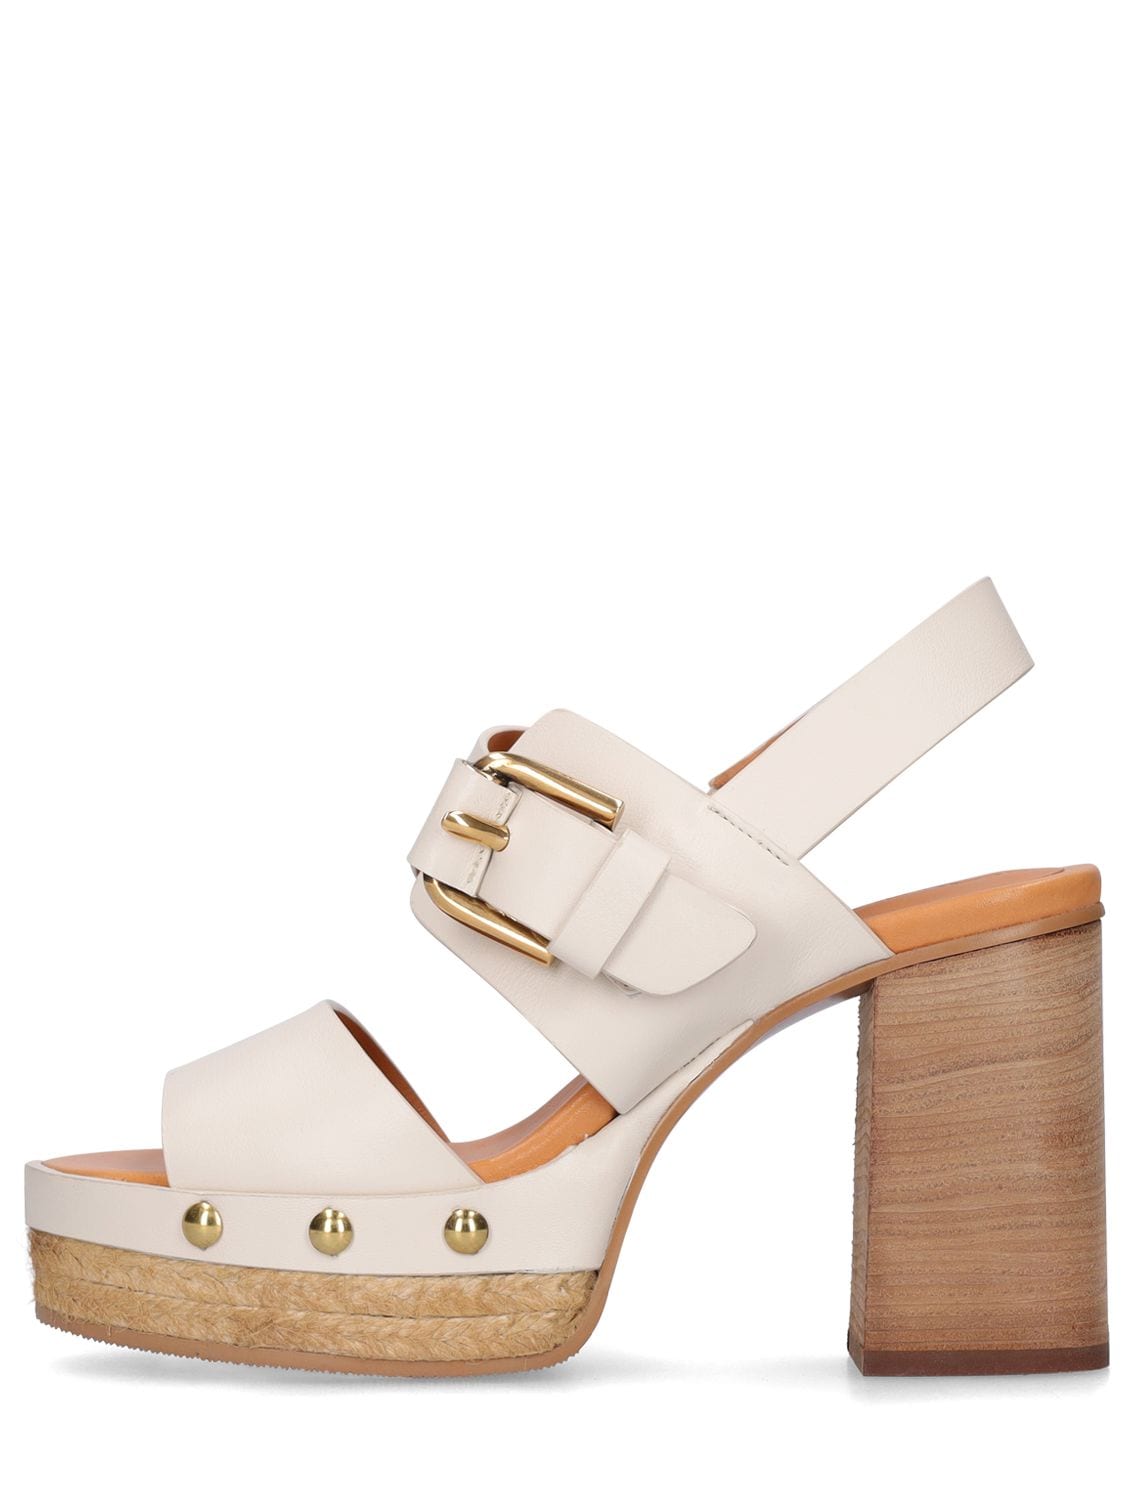 See By Chloé 105mm Joline Leather Platform Sandals In Off White